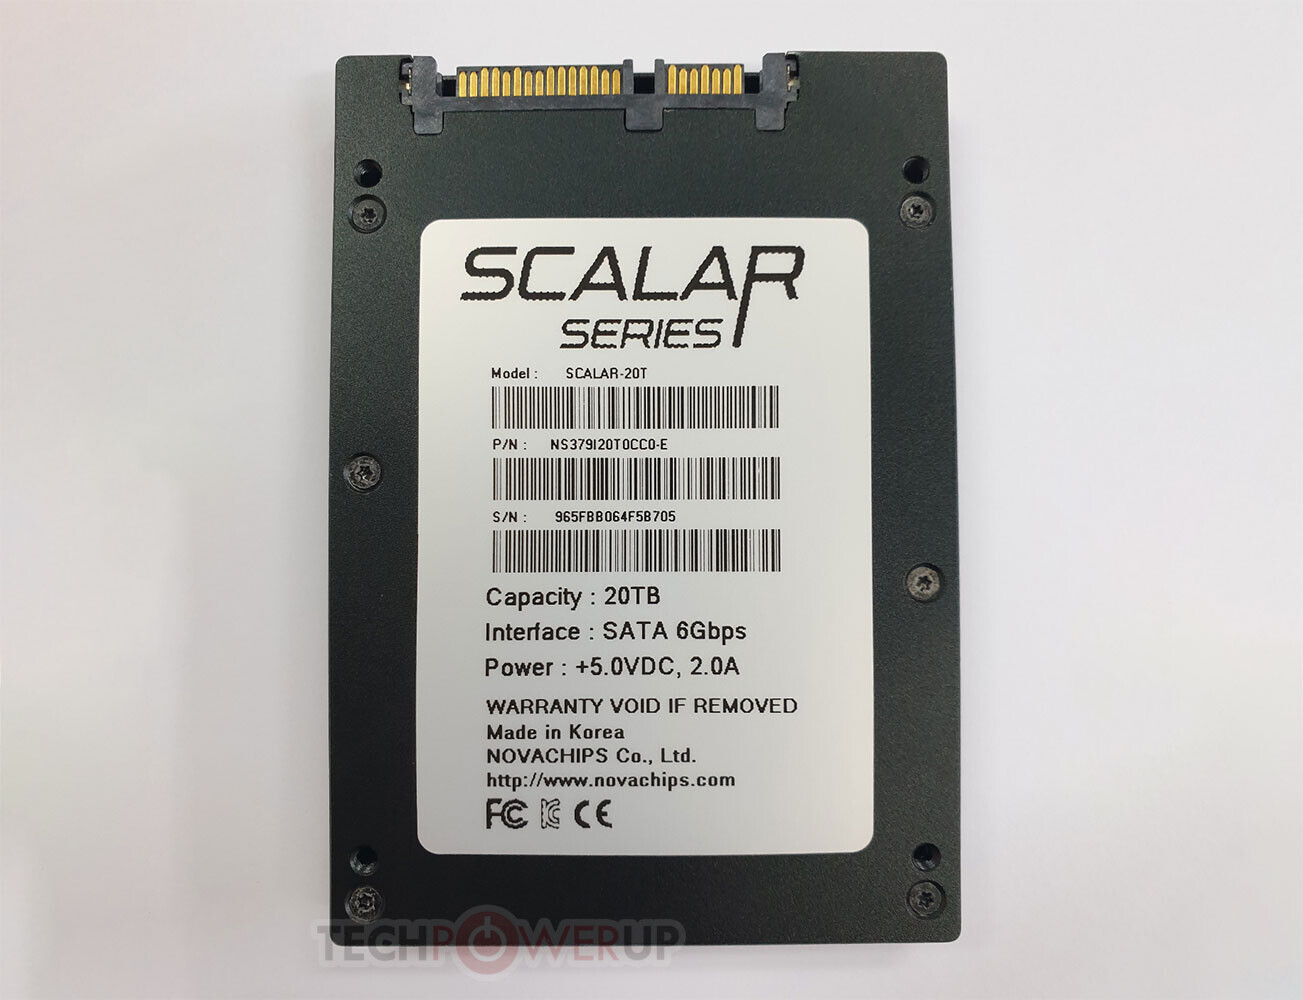 Novachips Announces SCALAR-20T 2.5-inch with 20TB Capacity | TechPowerUp